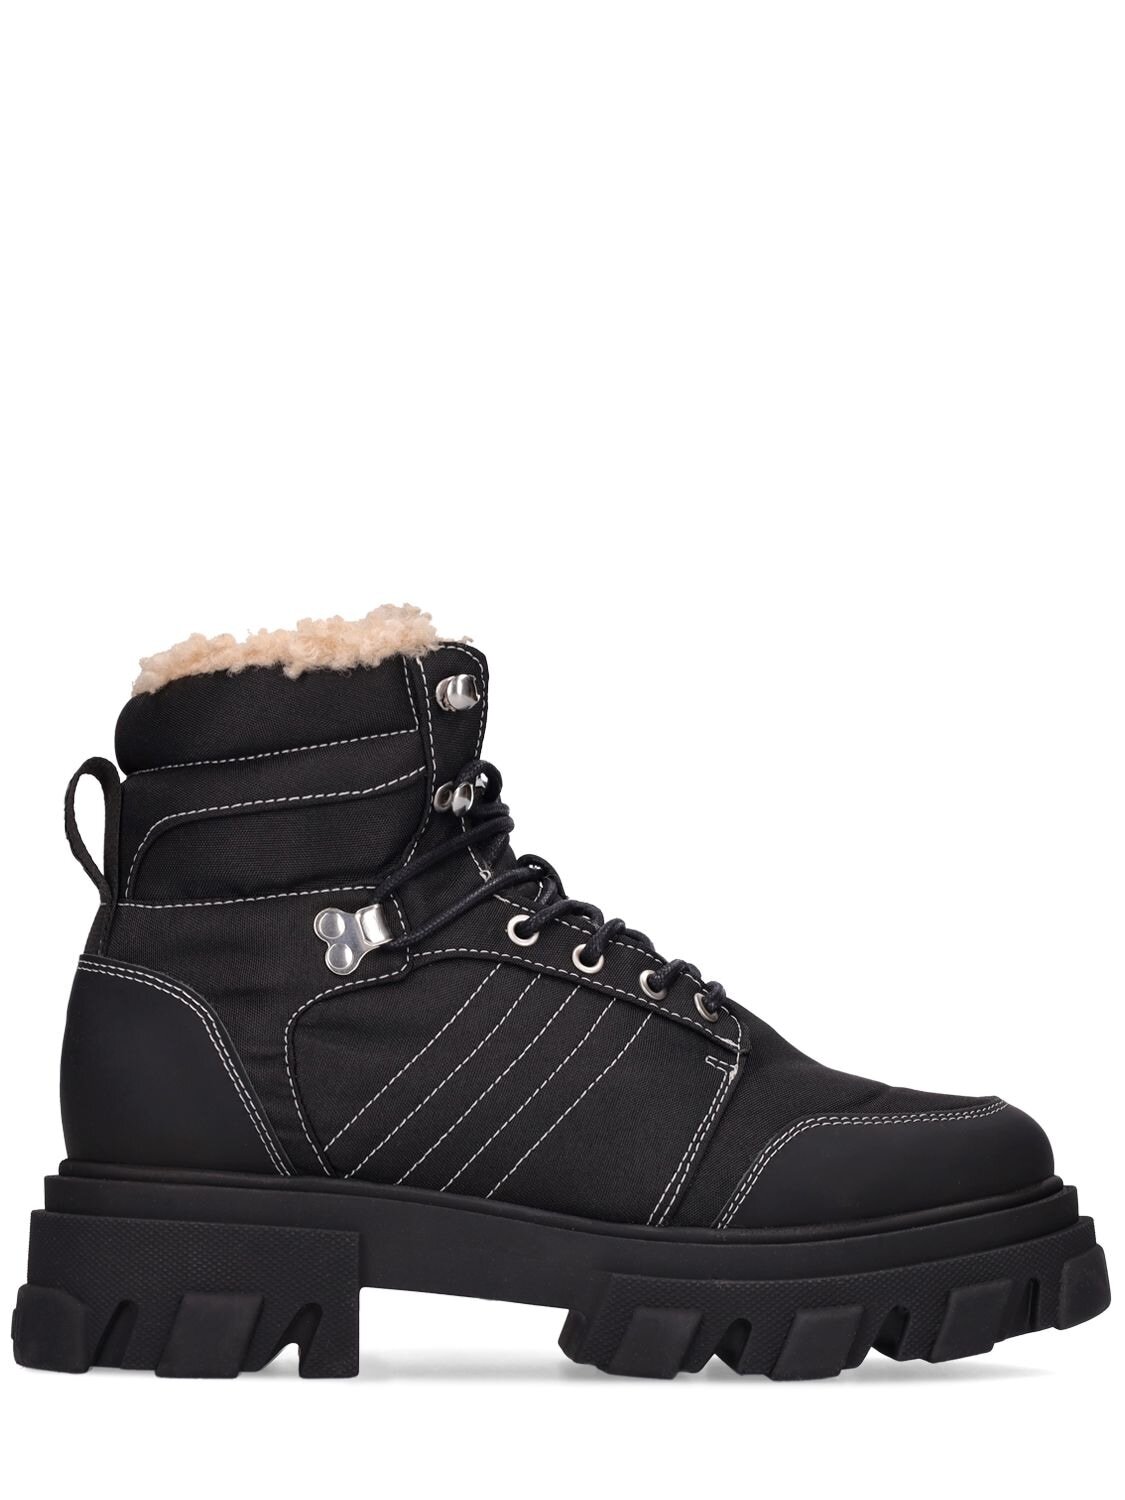 GANNI 50mm Nylon & Leather Hiking Boots in black